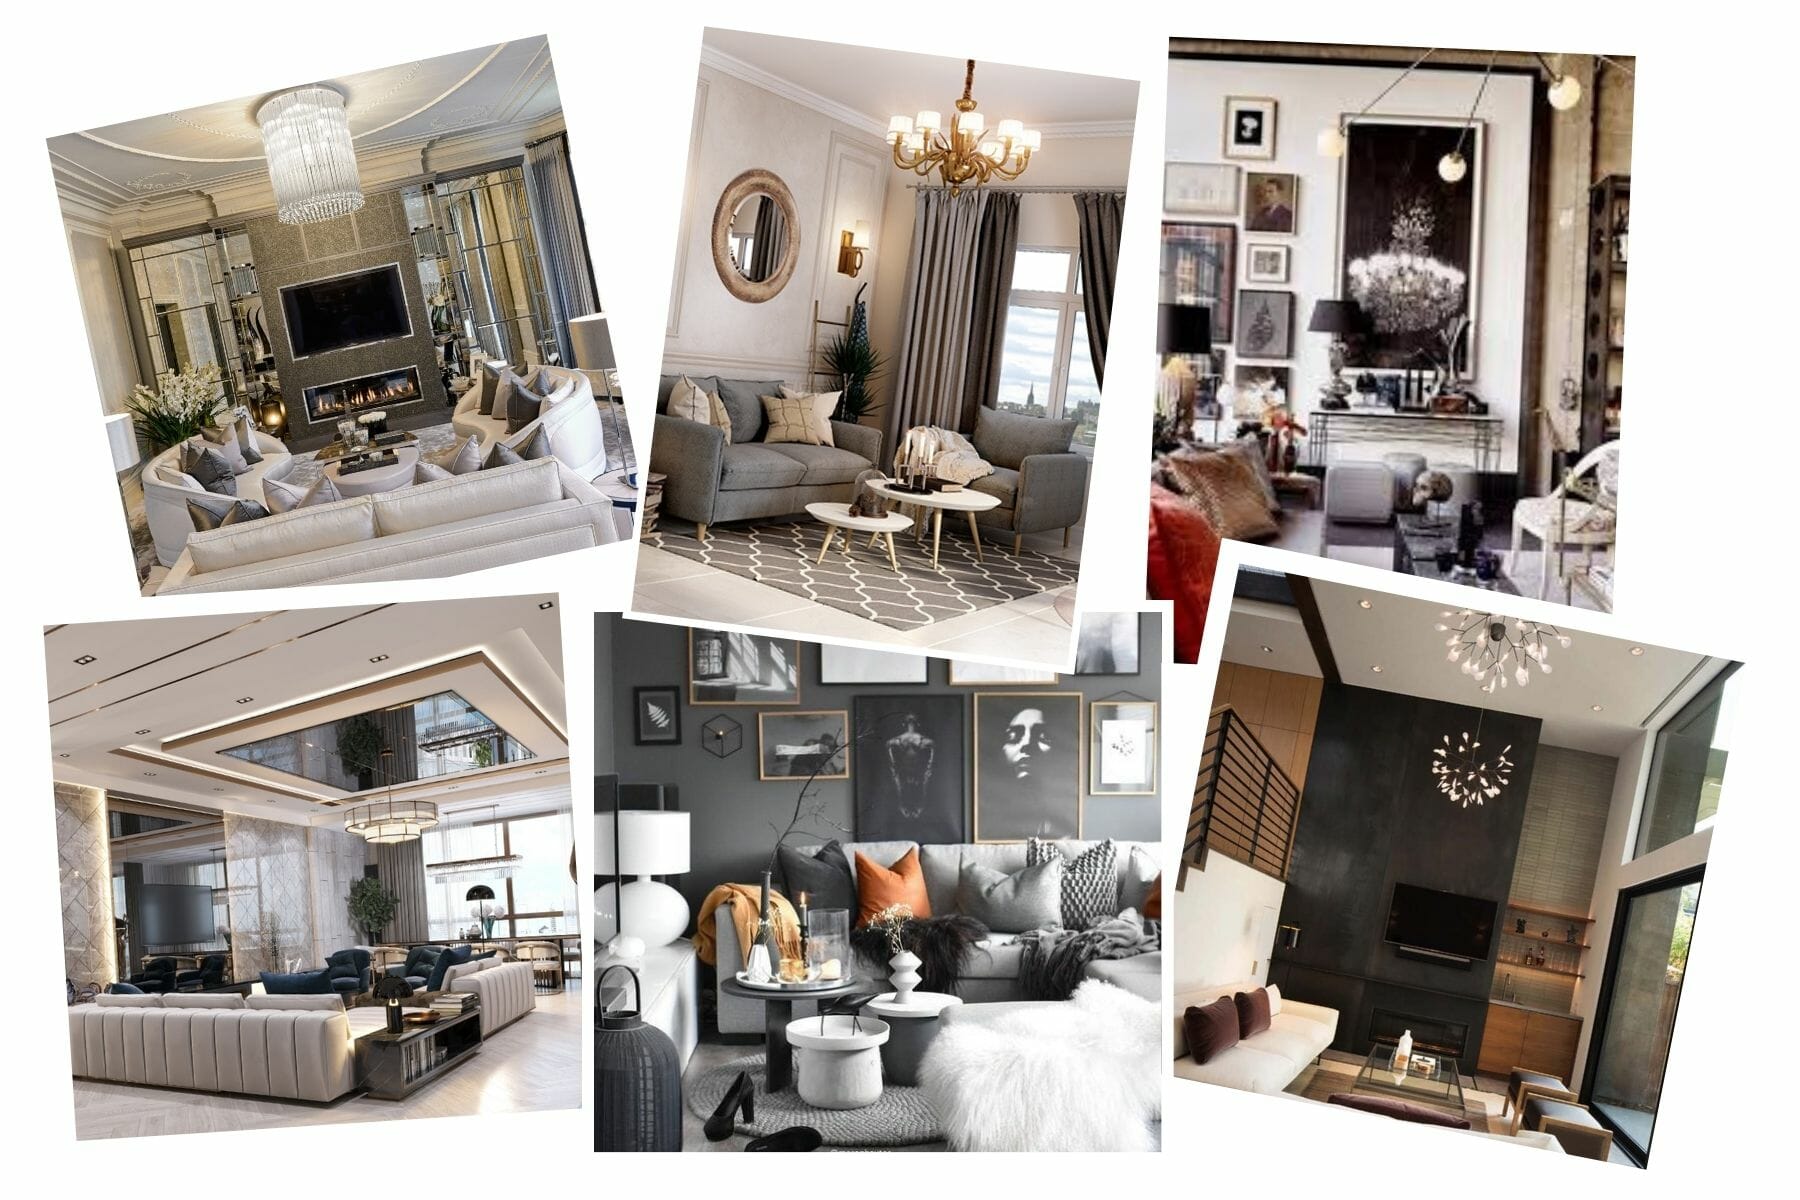 Glam living room ideas and inspiration board